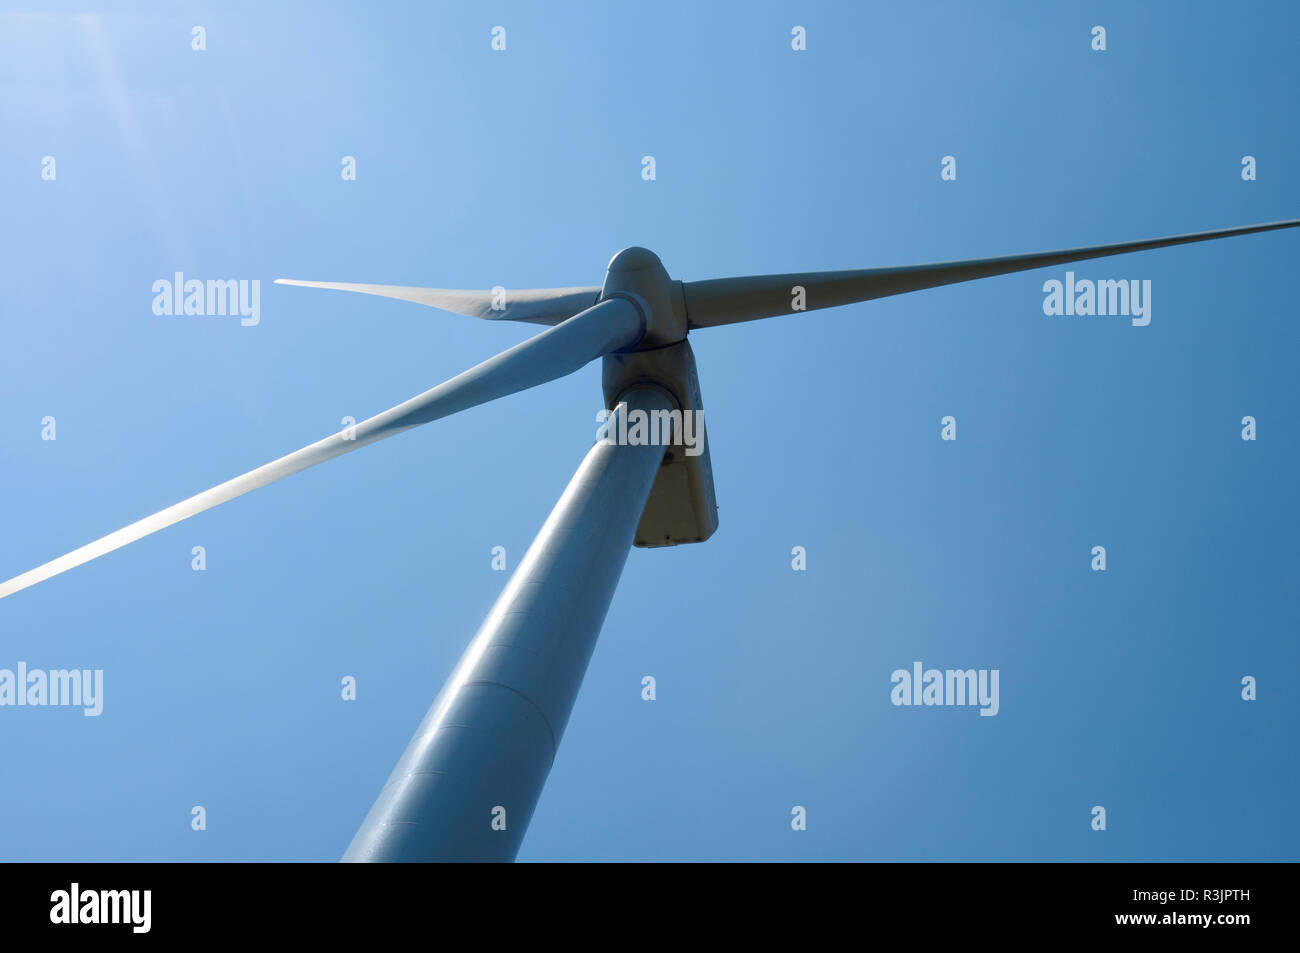 Contrasted view of a giant windmill Stock Photo